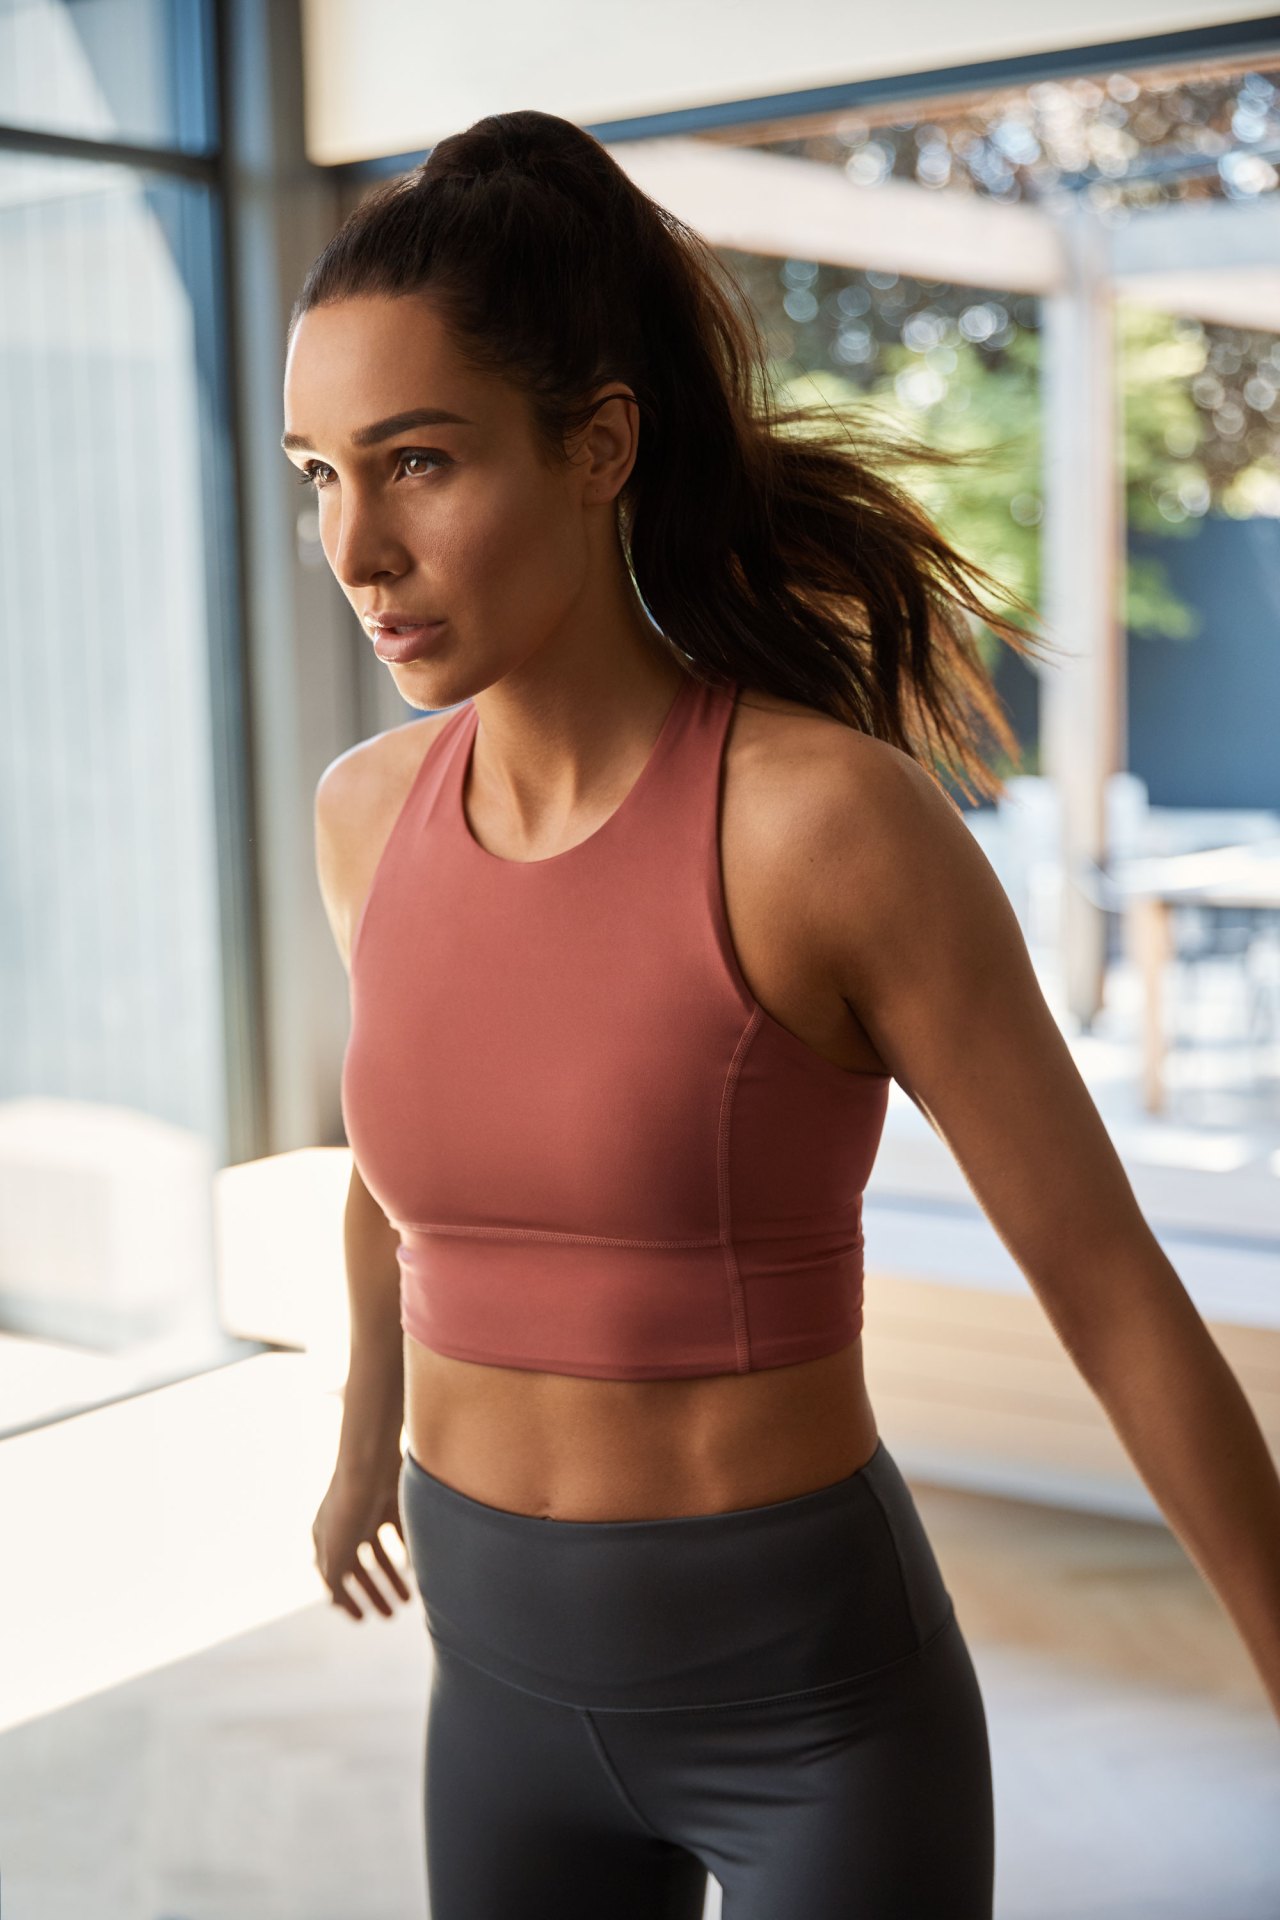 Don't put too much pressure on yourself': Kayla Itsines and Kelsey Wells  share fitness advice ahead of Dubai appearance